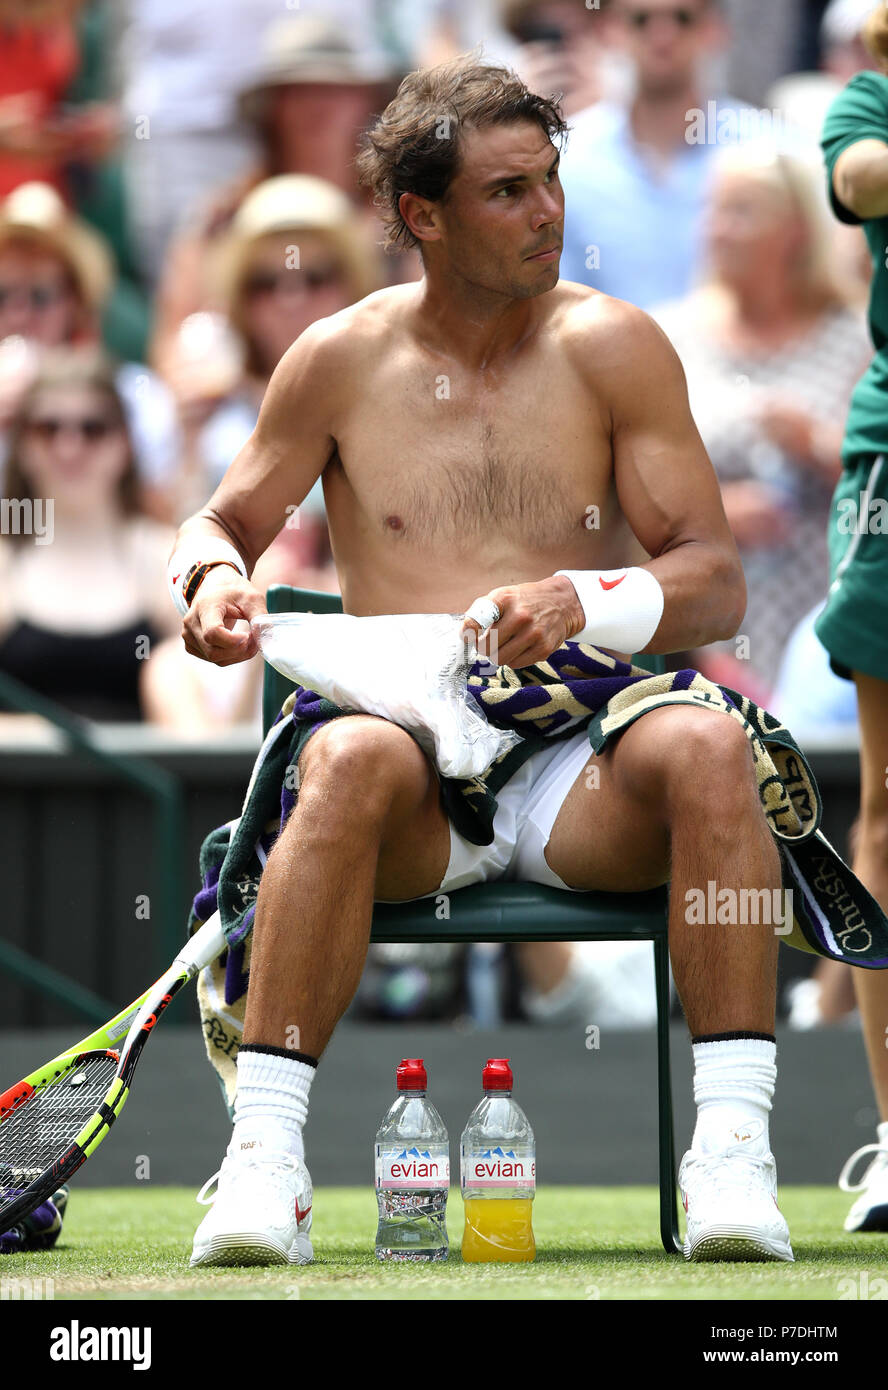 Rafael Nadal changes his shirt during a change of ends on day four of the Wimbledon Championships at the All England Lawn Tennis and Croquet Club, Wimbledon. PRESS ASSOCIATION Photo. Picture date: Thursday July 5, 2018. See PA story TENNIS Wimbledon. Photo credit should read: John Walton/PA Wire. Stock Photo